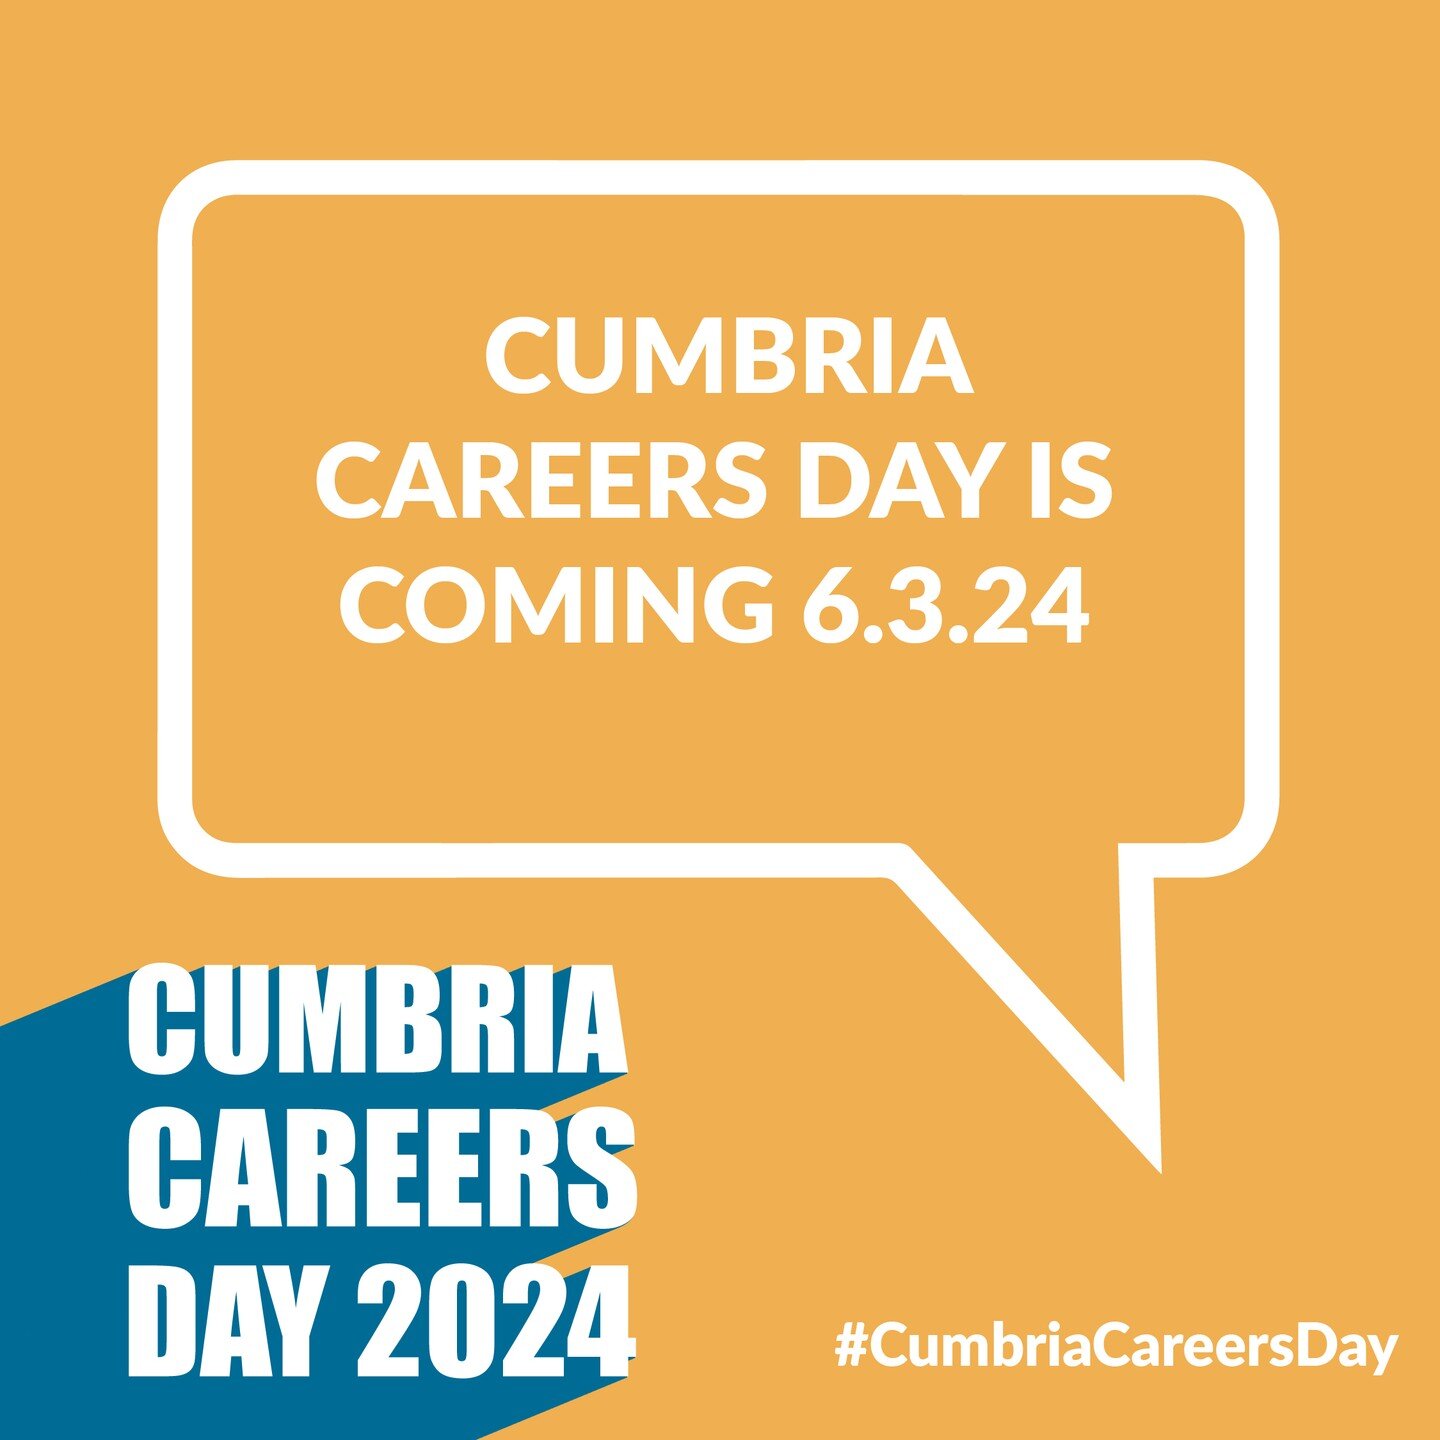 Did You Know?
It's just one month until Cumbria Careers Day - 6th March 2024

We have some great career opportunities available in the Lakes we can't wait to tell you about some.
#DidYouKnow #cumbriacareersday